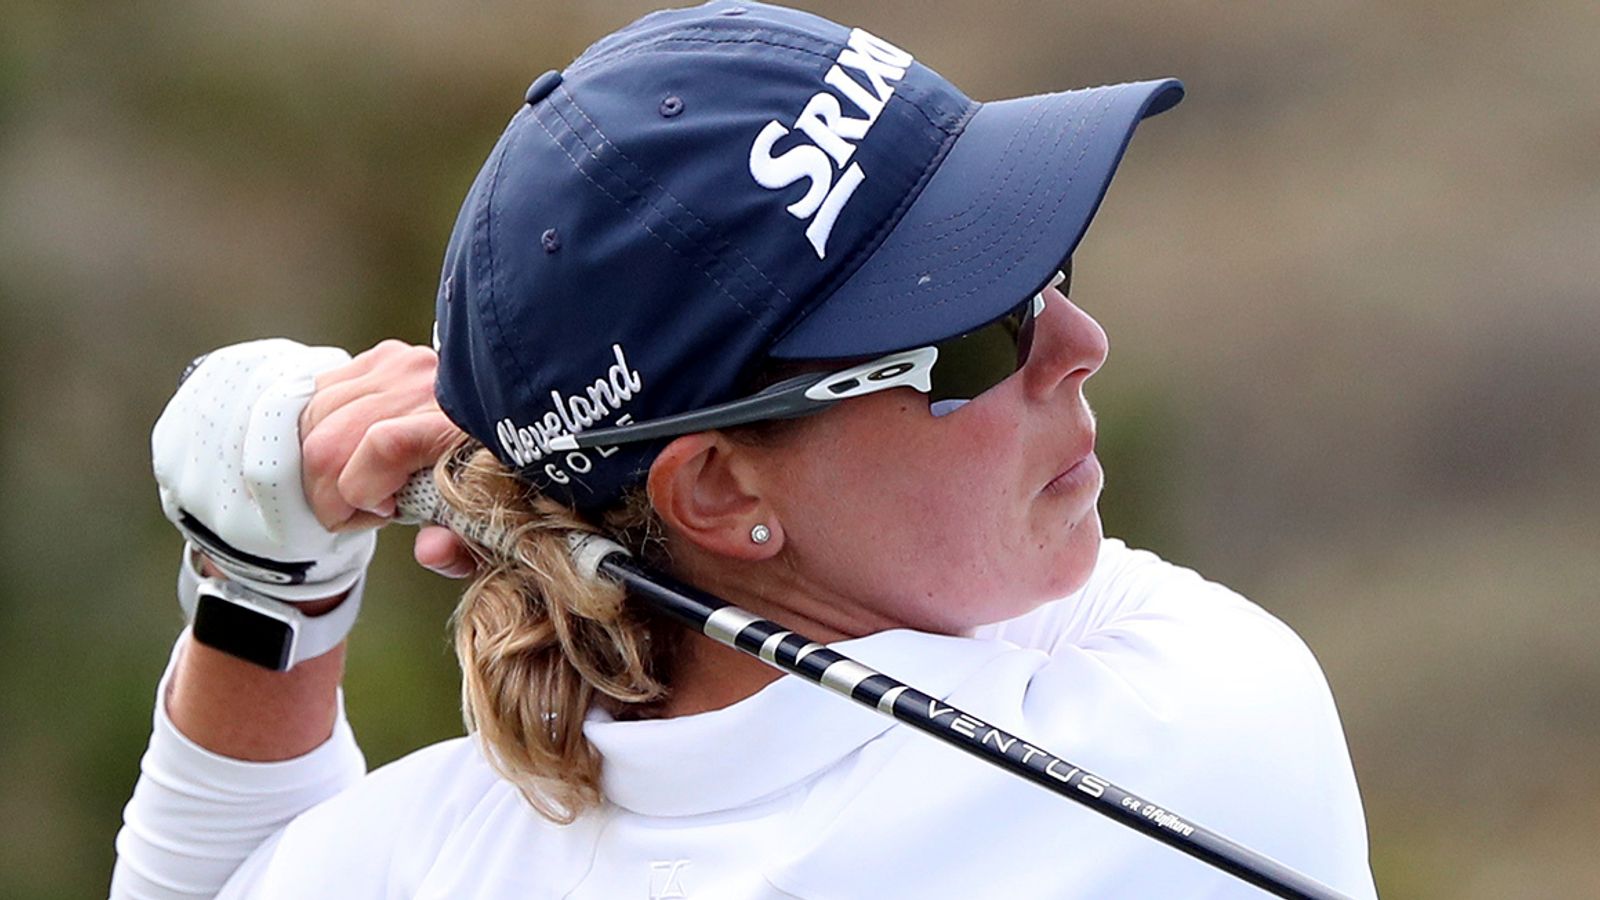 AIG Women’s Open: Ashleigh Buhai defeats In Gee Chun in play-off at Muirfield to win maiden major